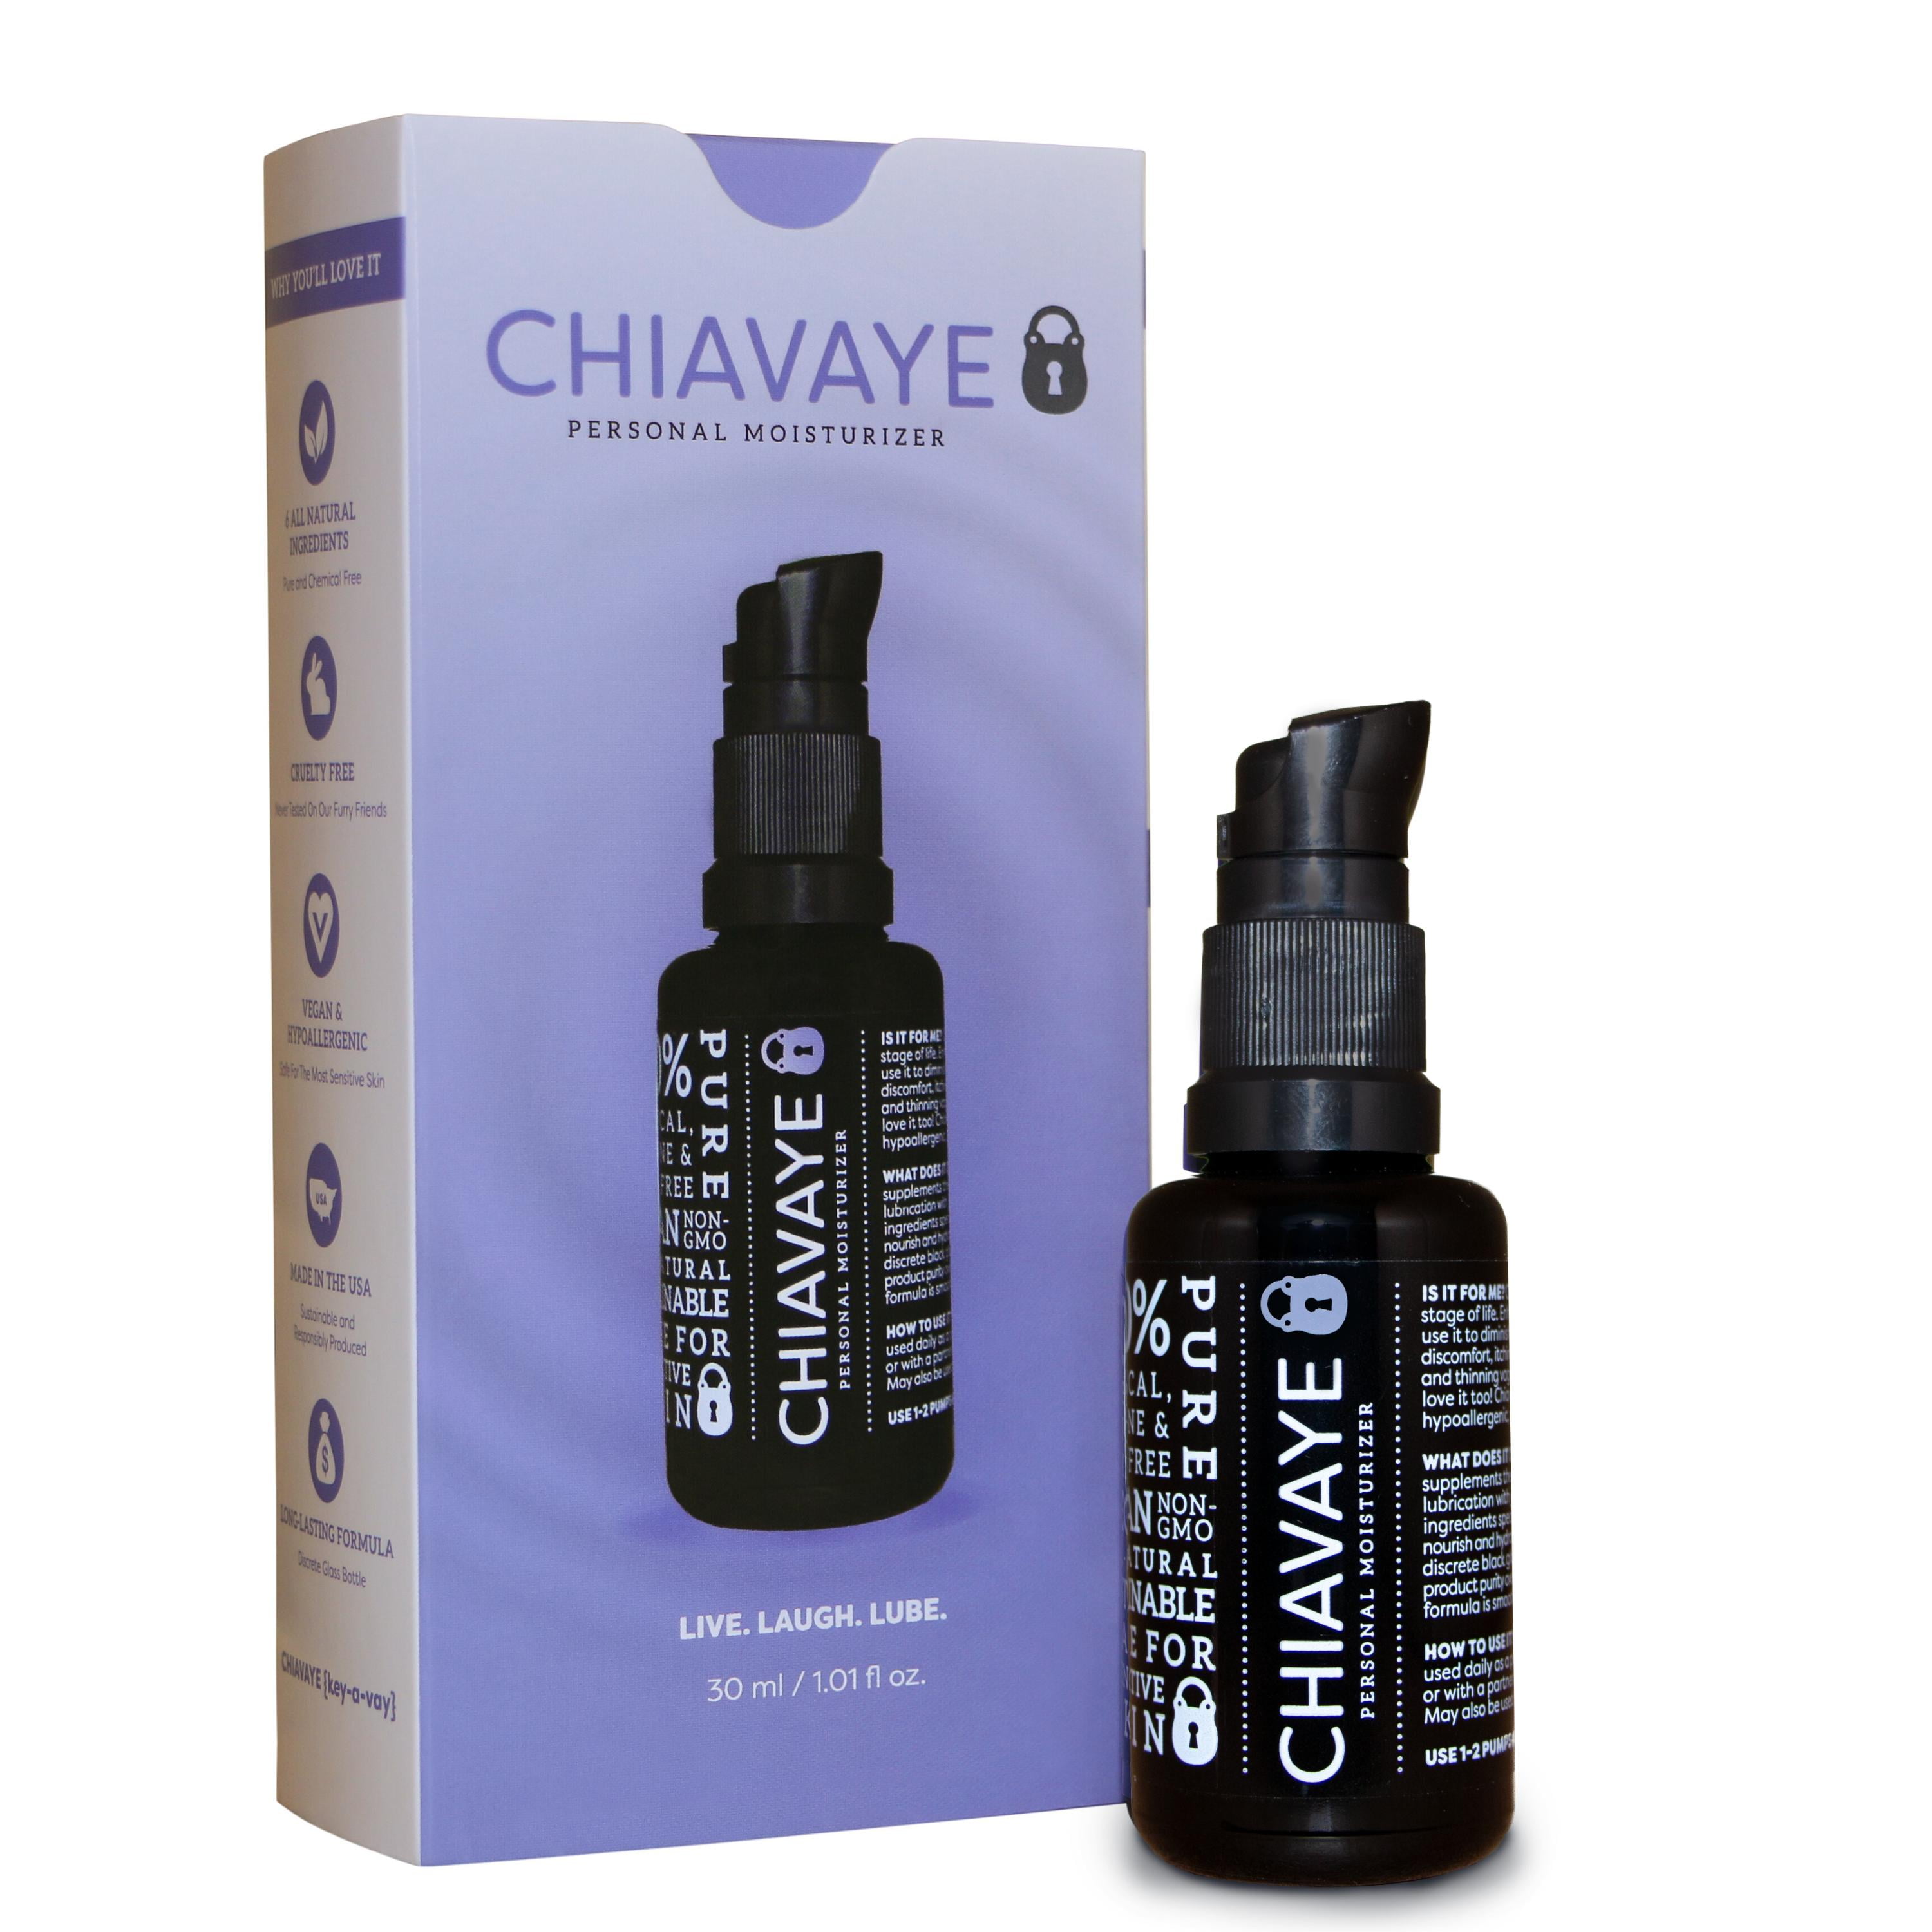 Chiavaye Personal Moisturizer and Lubricant, All Natural, Organic - 30ml